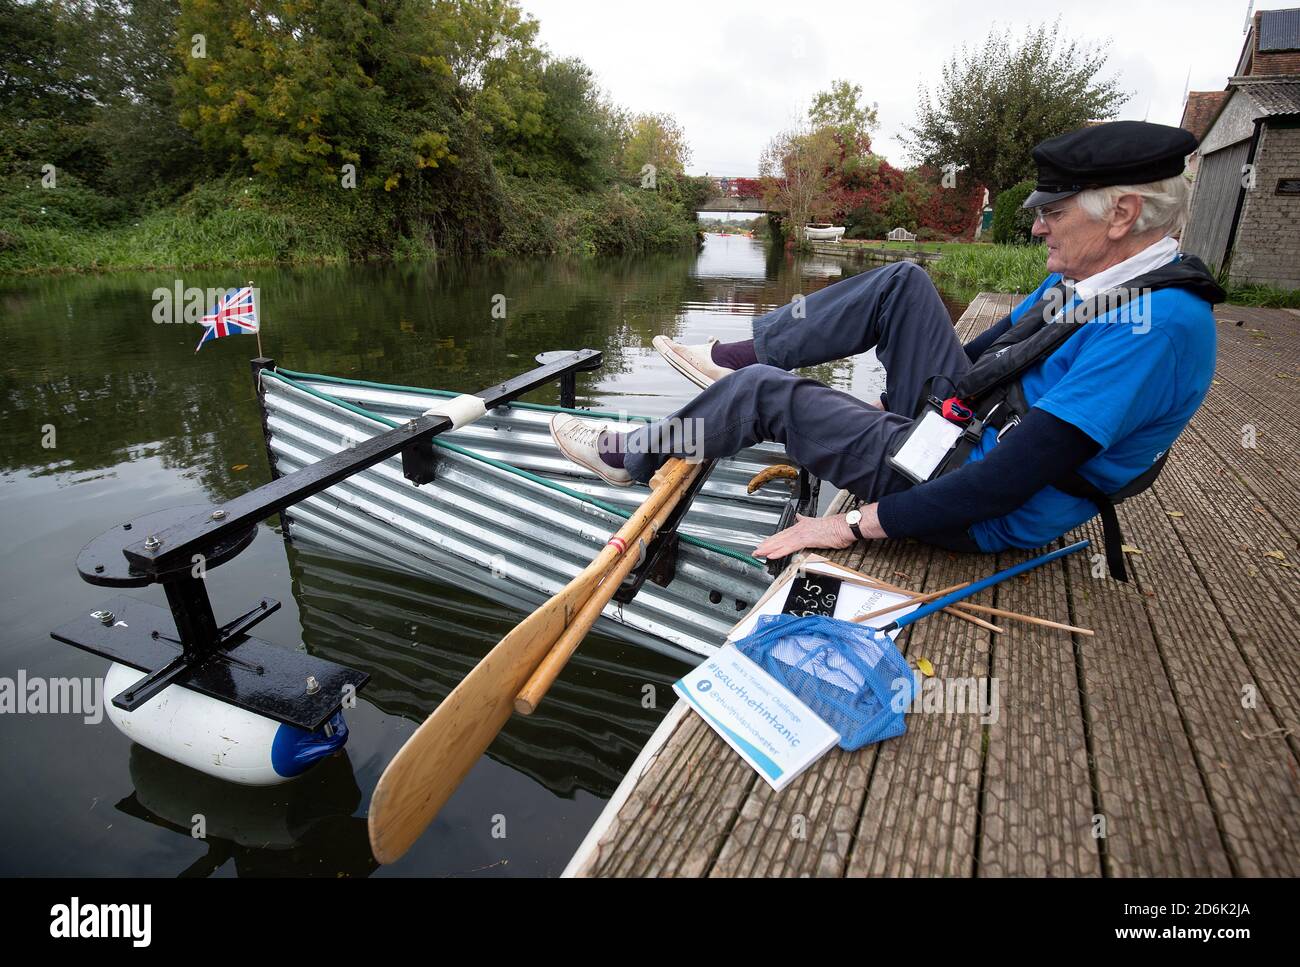 Michael Stanley, who is also known as 'Major Mick', 80, places a Union flag into the bow of his boat in Hunston, West Sussex, as he prepares to row along the Chichester canal in the home-made rowing boat, named the Tintanic. Major Mick, 80, is rowing along the Chichester canal in his home-made rowing boat, named the Tintanic, for a 100-mile charity challenge, rowing 3 miles at a time, to raise money for St Wilfrid's Hospice in Bosham. Stock Photo